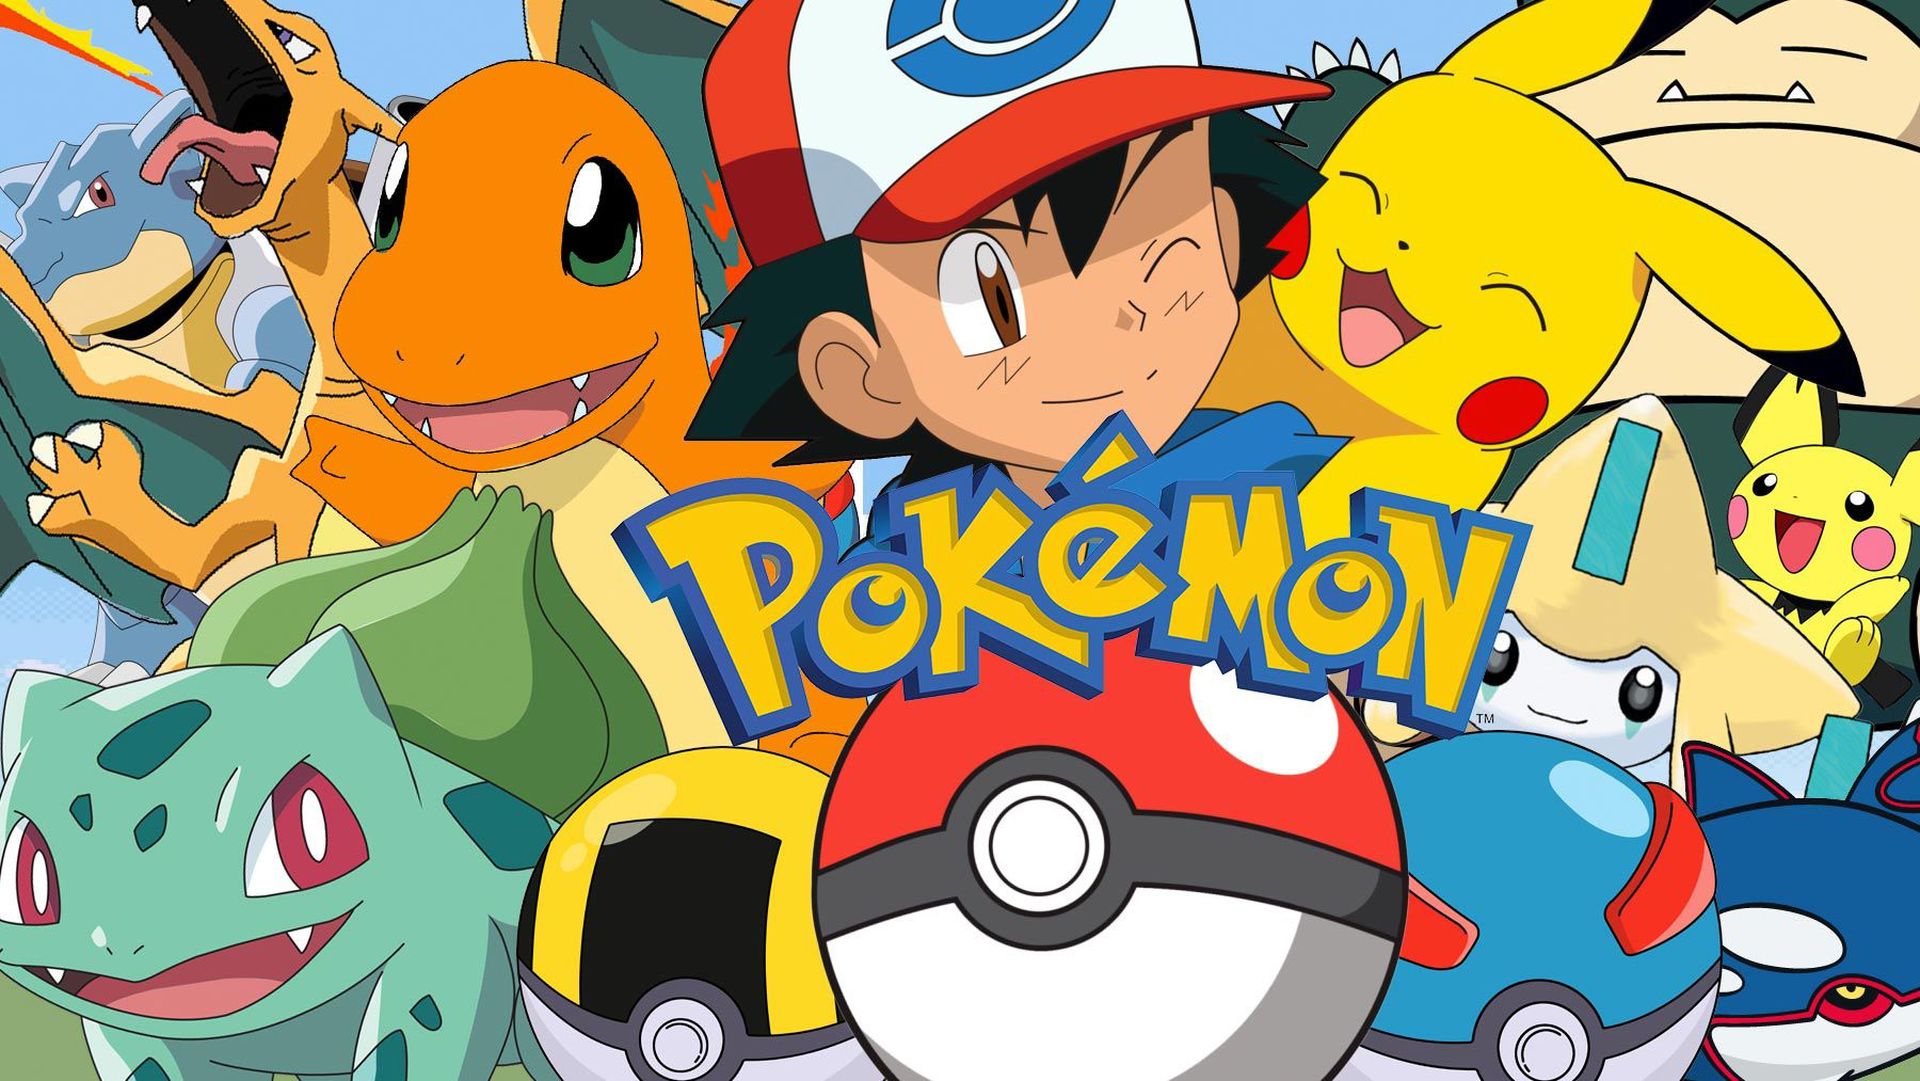 Pokemon characters with logo in the center